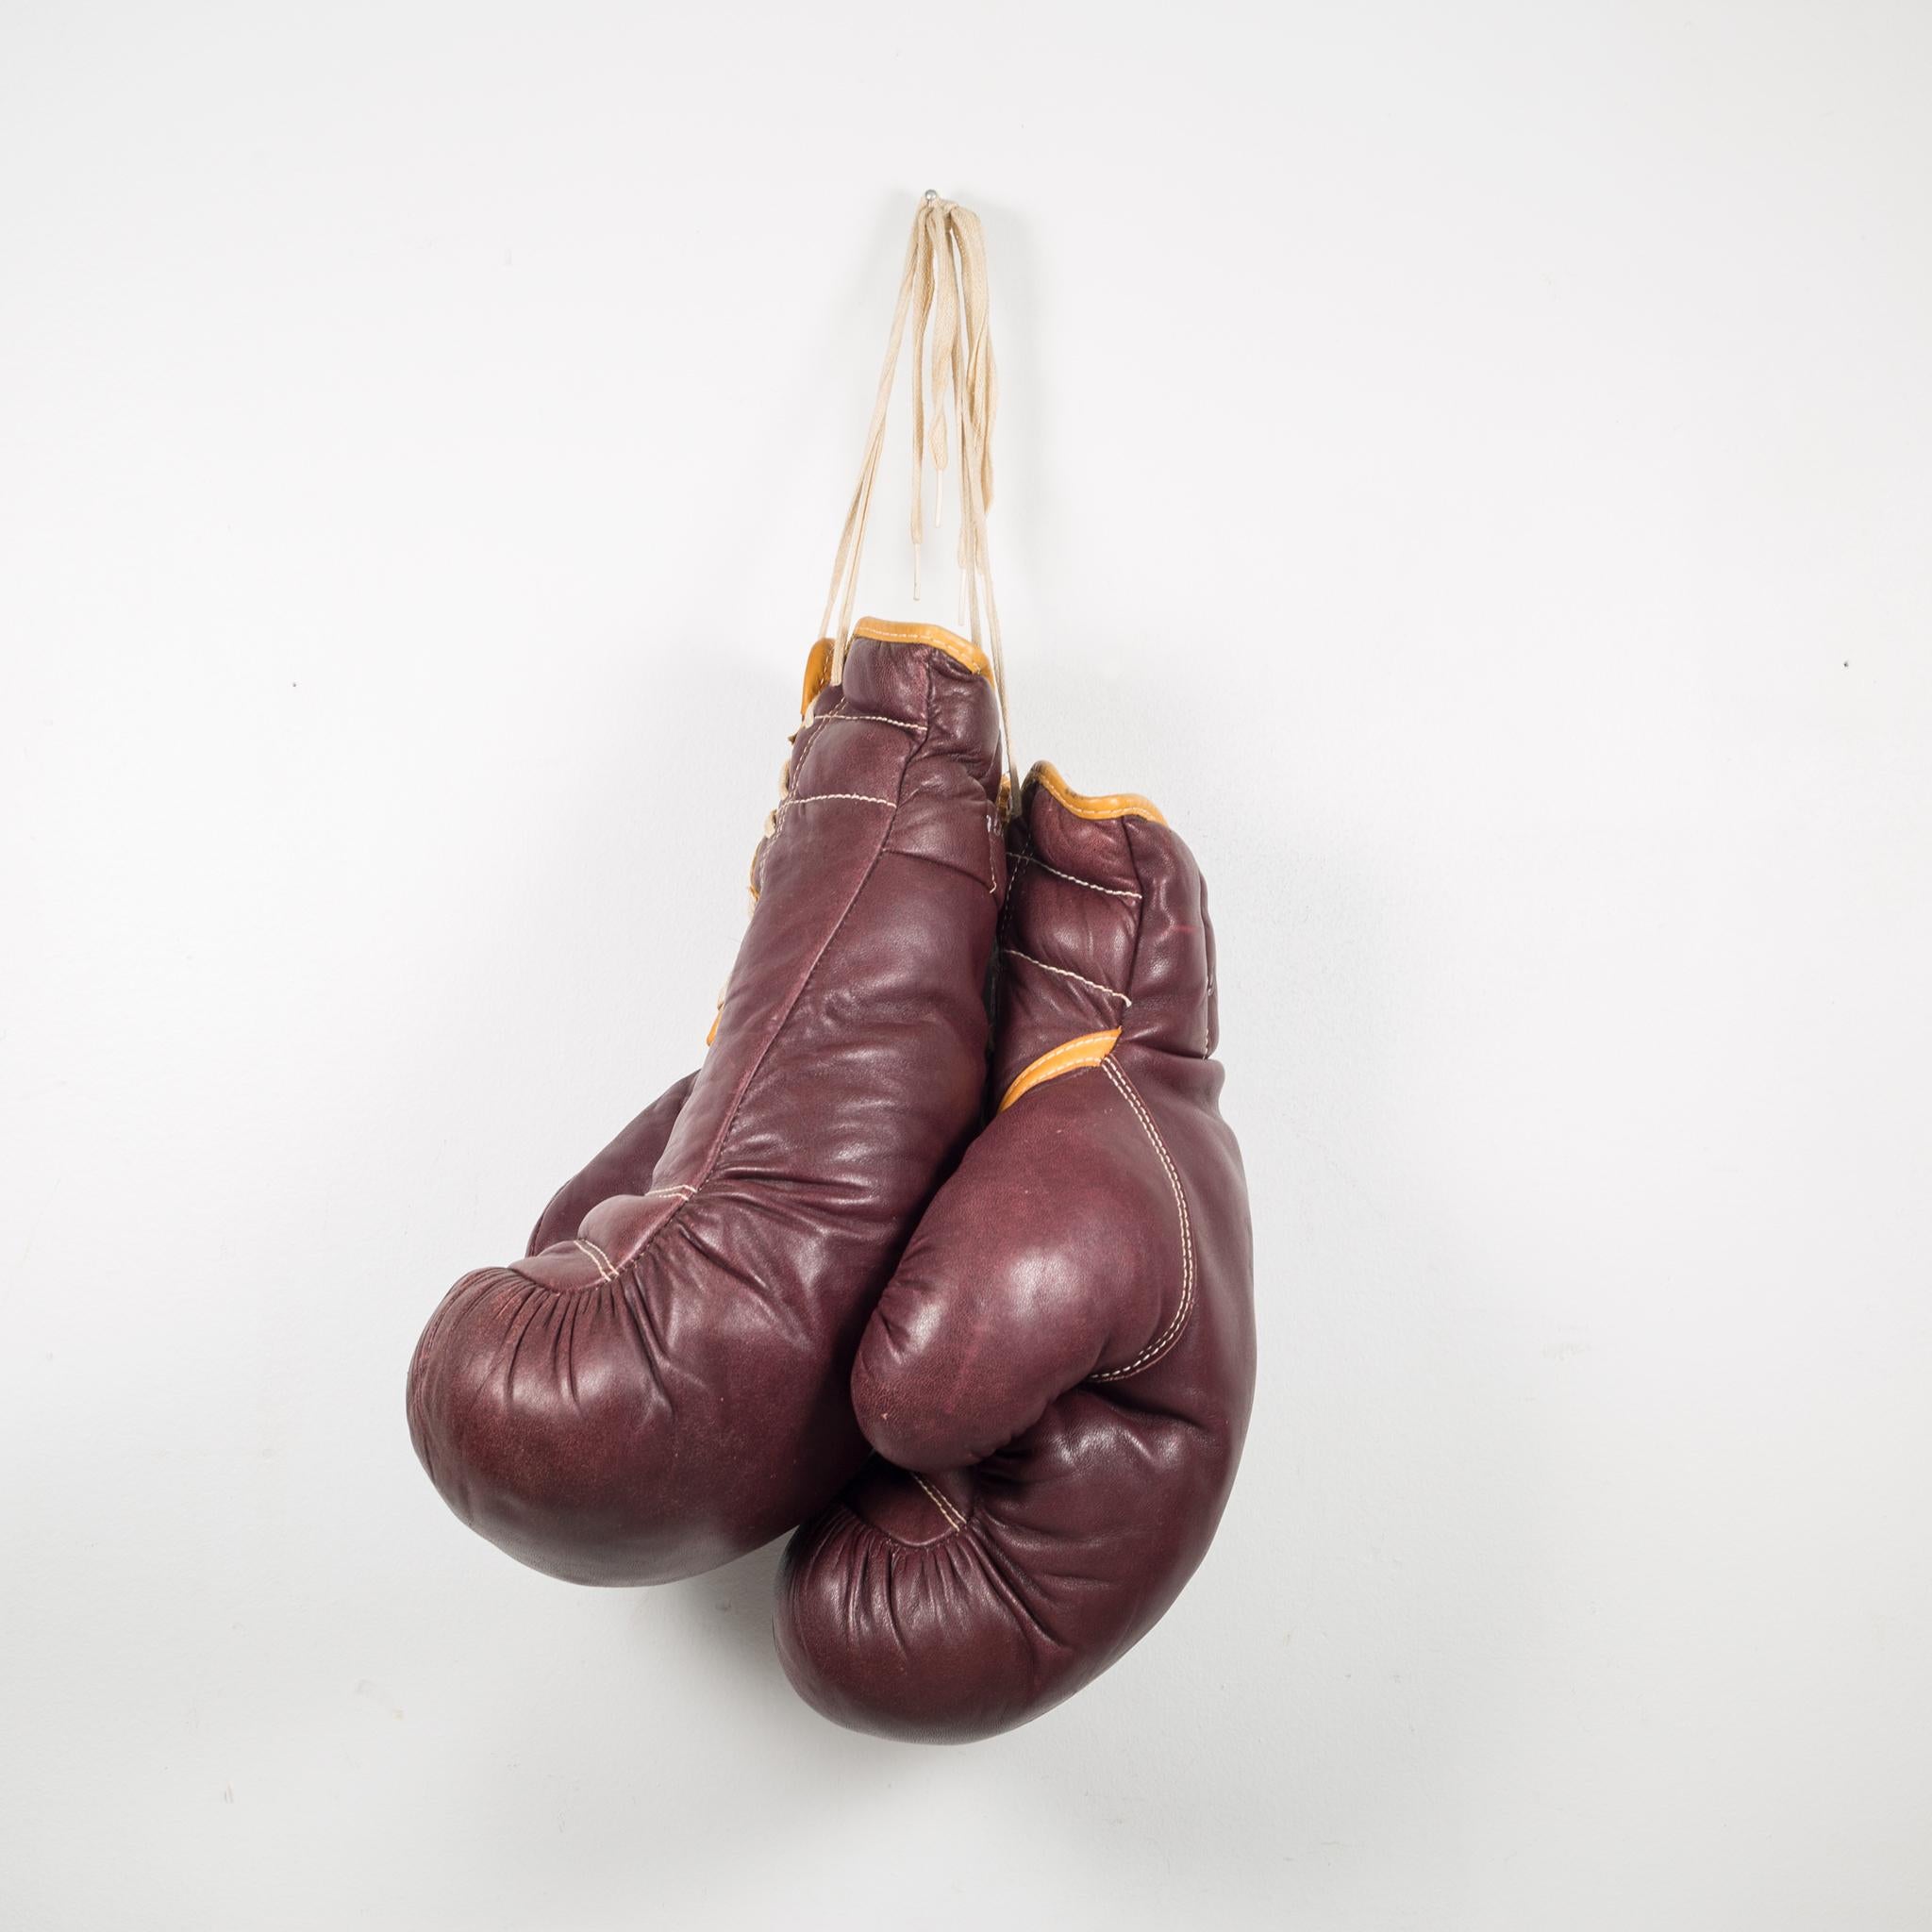 Industrial Leather MacGregor Boxing Gloves, circa 1950